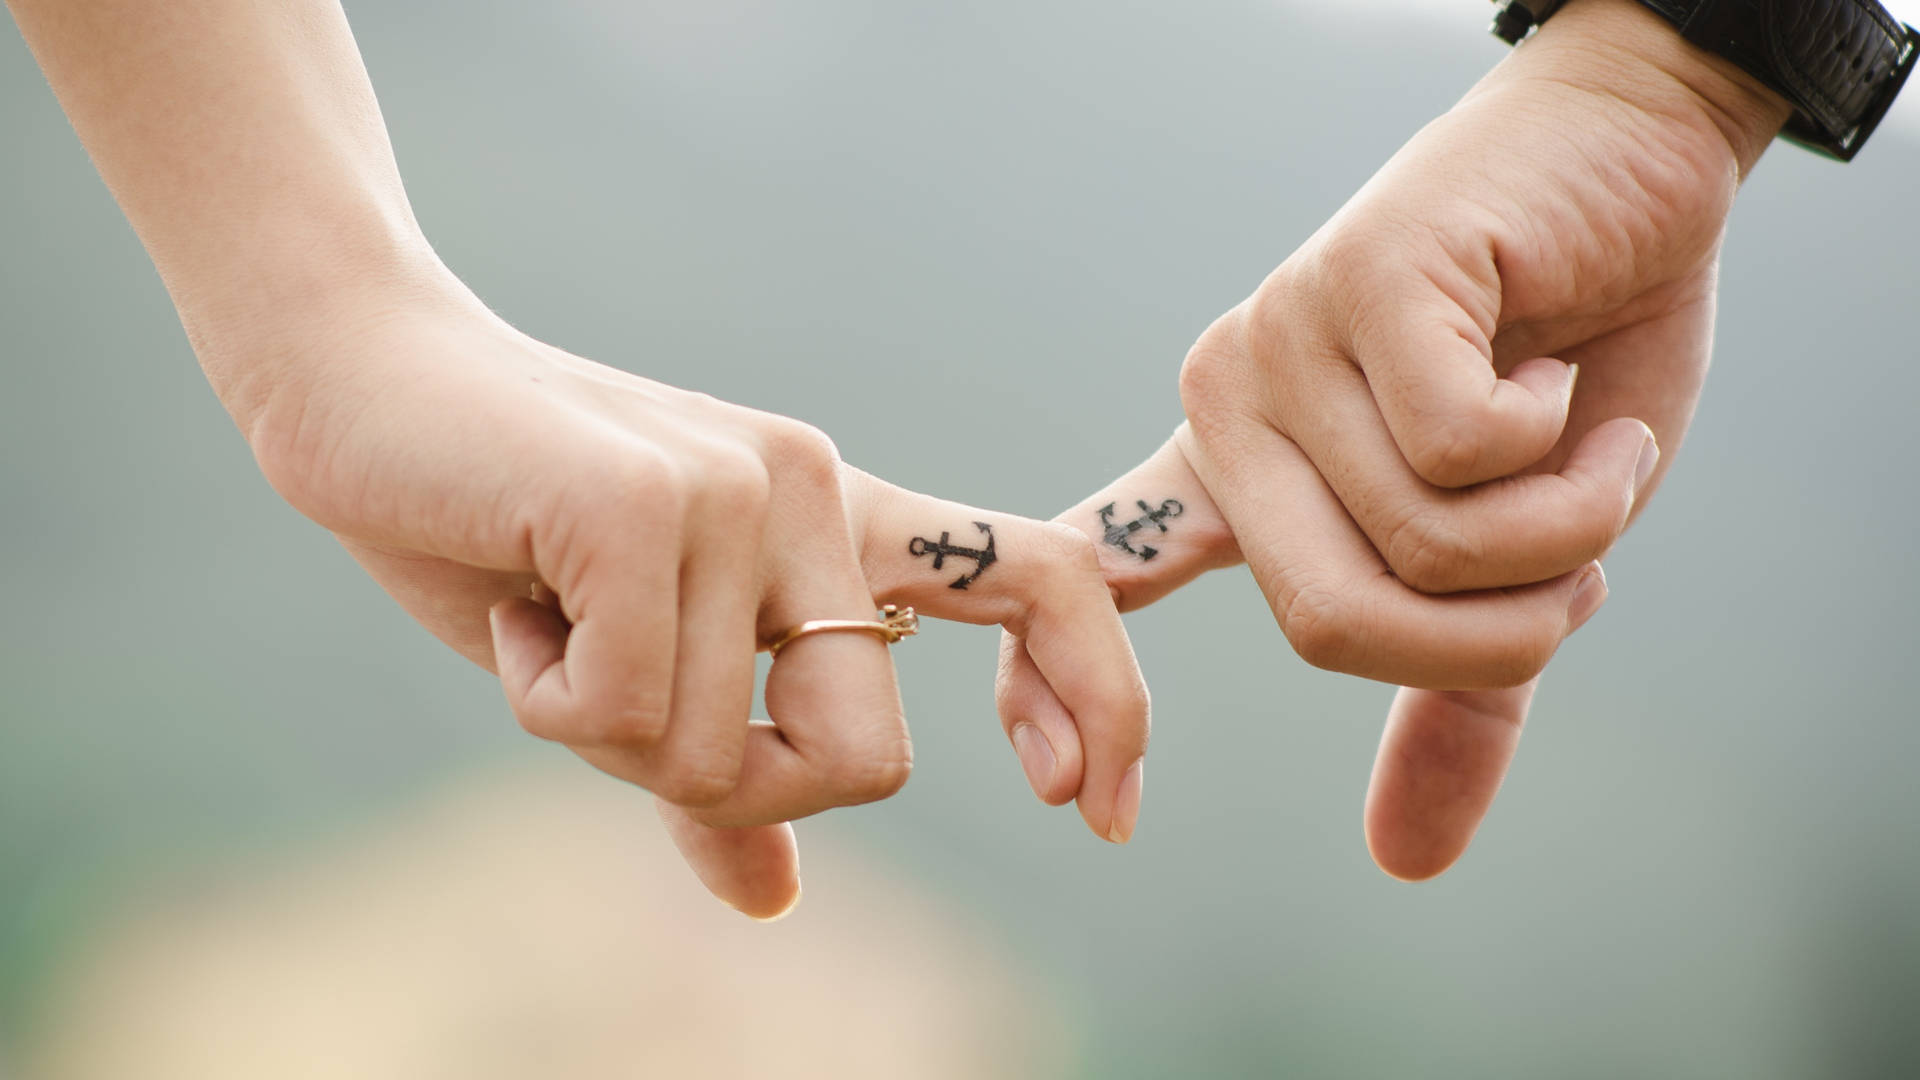 Sweet Holding Hands With Anchor Tattoos Background